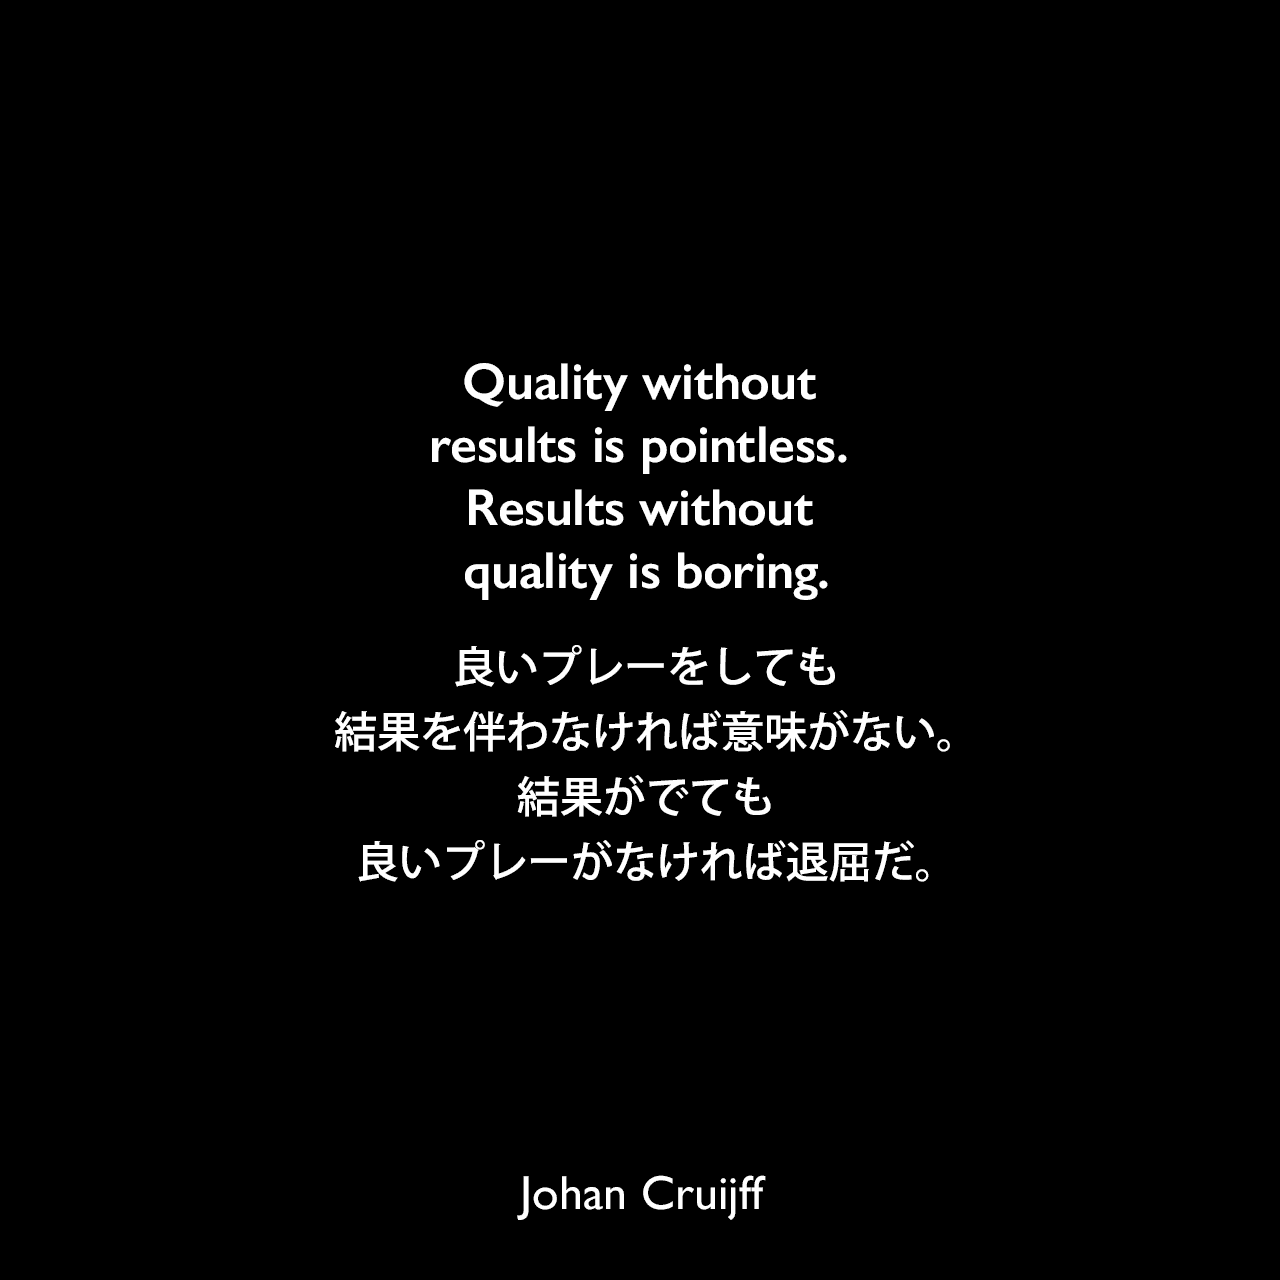 Quality without results is pointless. Results without quality is boring.良いプレーをしても結果を伴わなければ意味がない。結果がでても良いプレーがなければ退屈だ。- 2016年3月メッシのTwitterページでJohan Cruijff